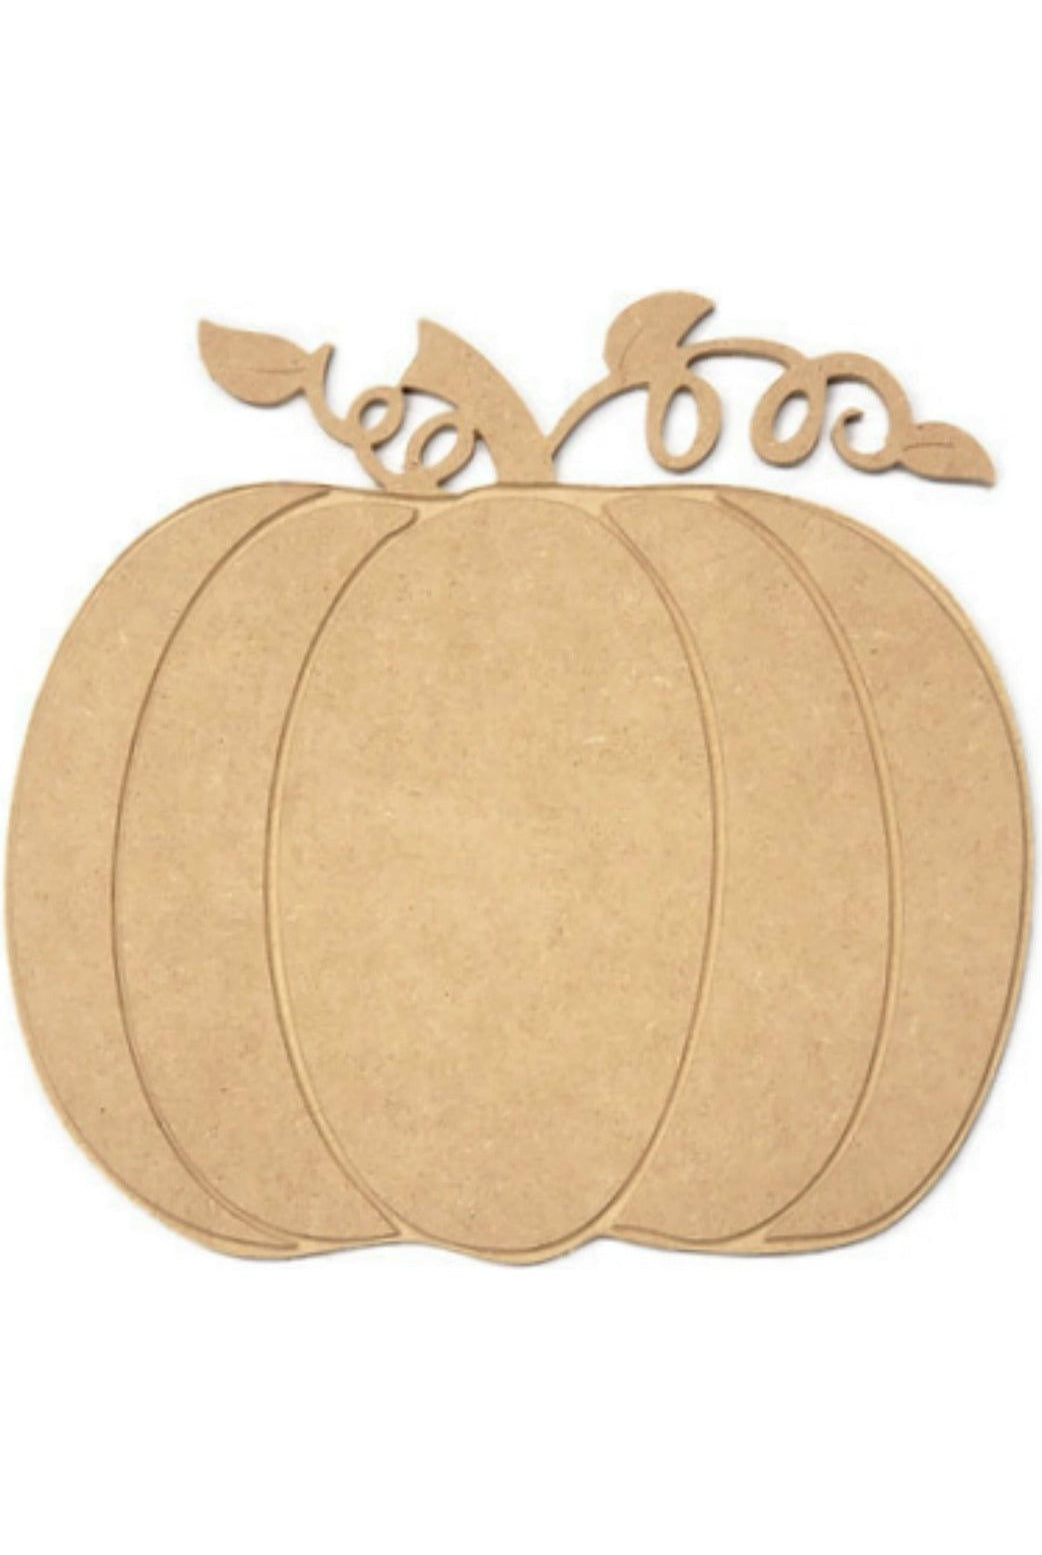 Harvest Pumpkin Wood Cutout - Unfinished Wood - Michelle's aDOORable Creations - Unfinished Wood Cutouts